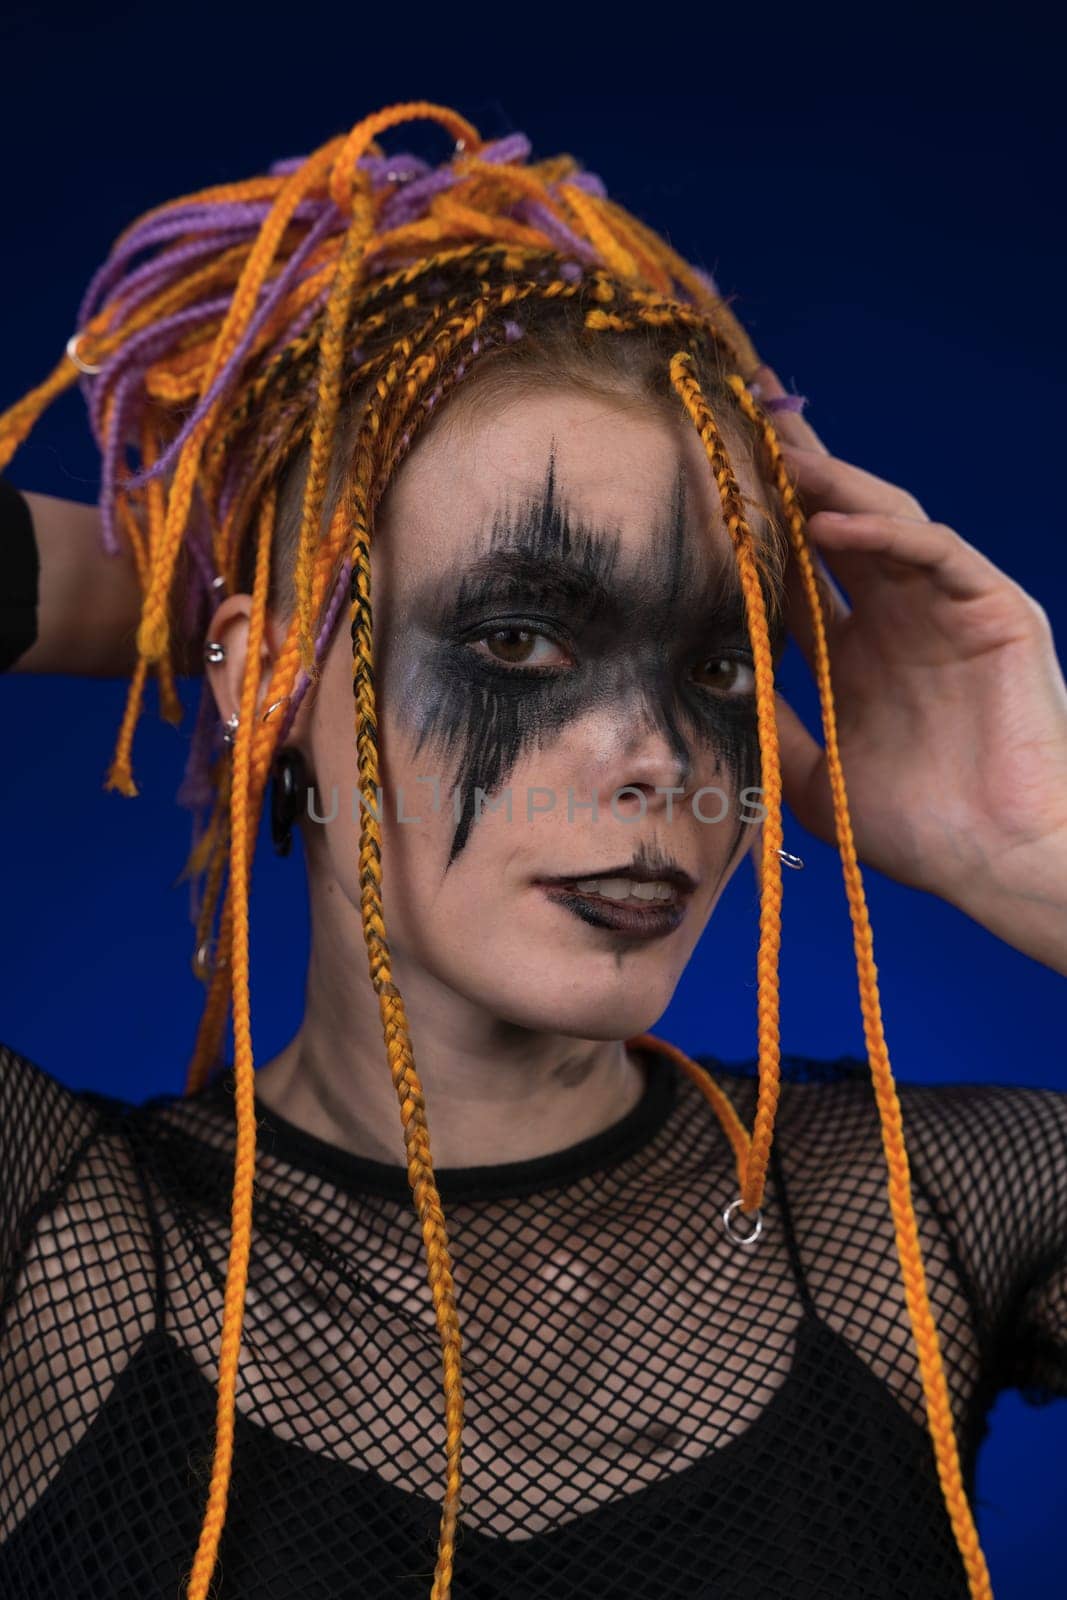 Informal young woman with colored dreadlocks hairstyle and horror black stage make up painted on face. Studio shot on blue background. Part of photo series